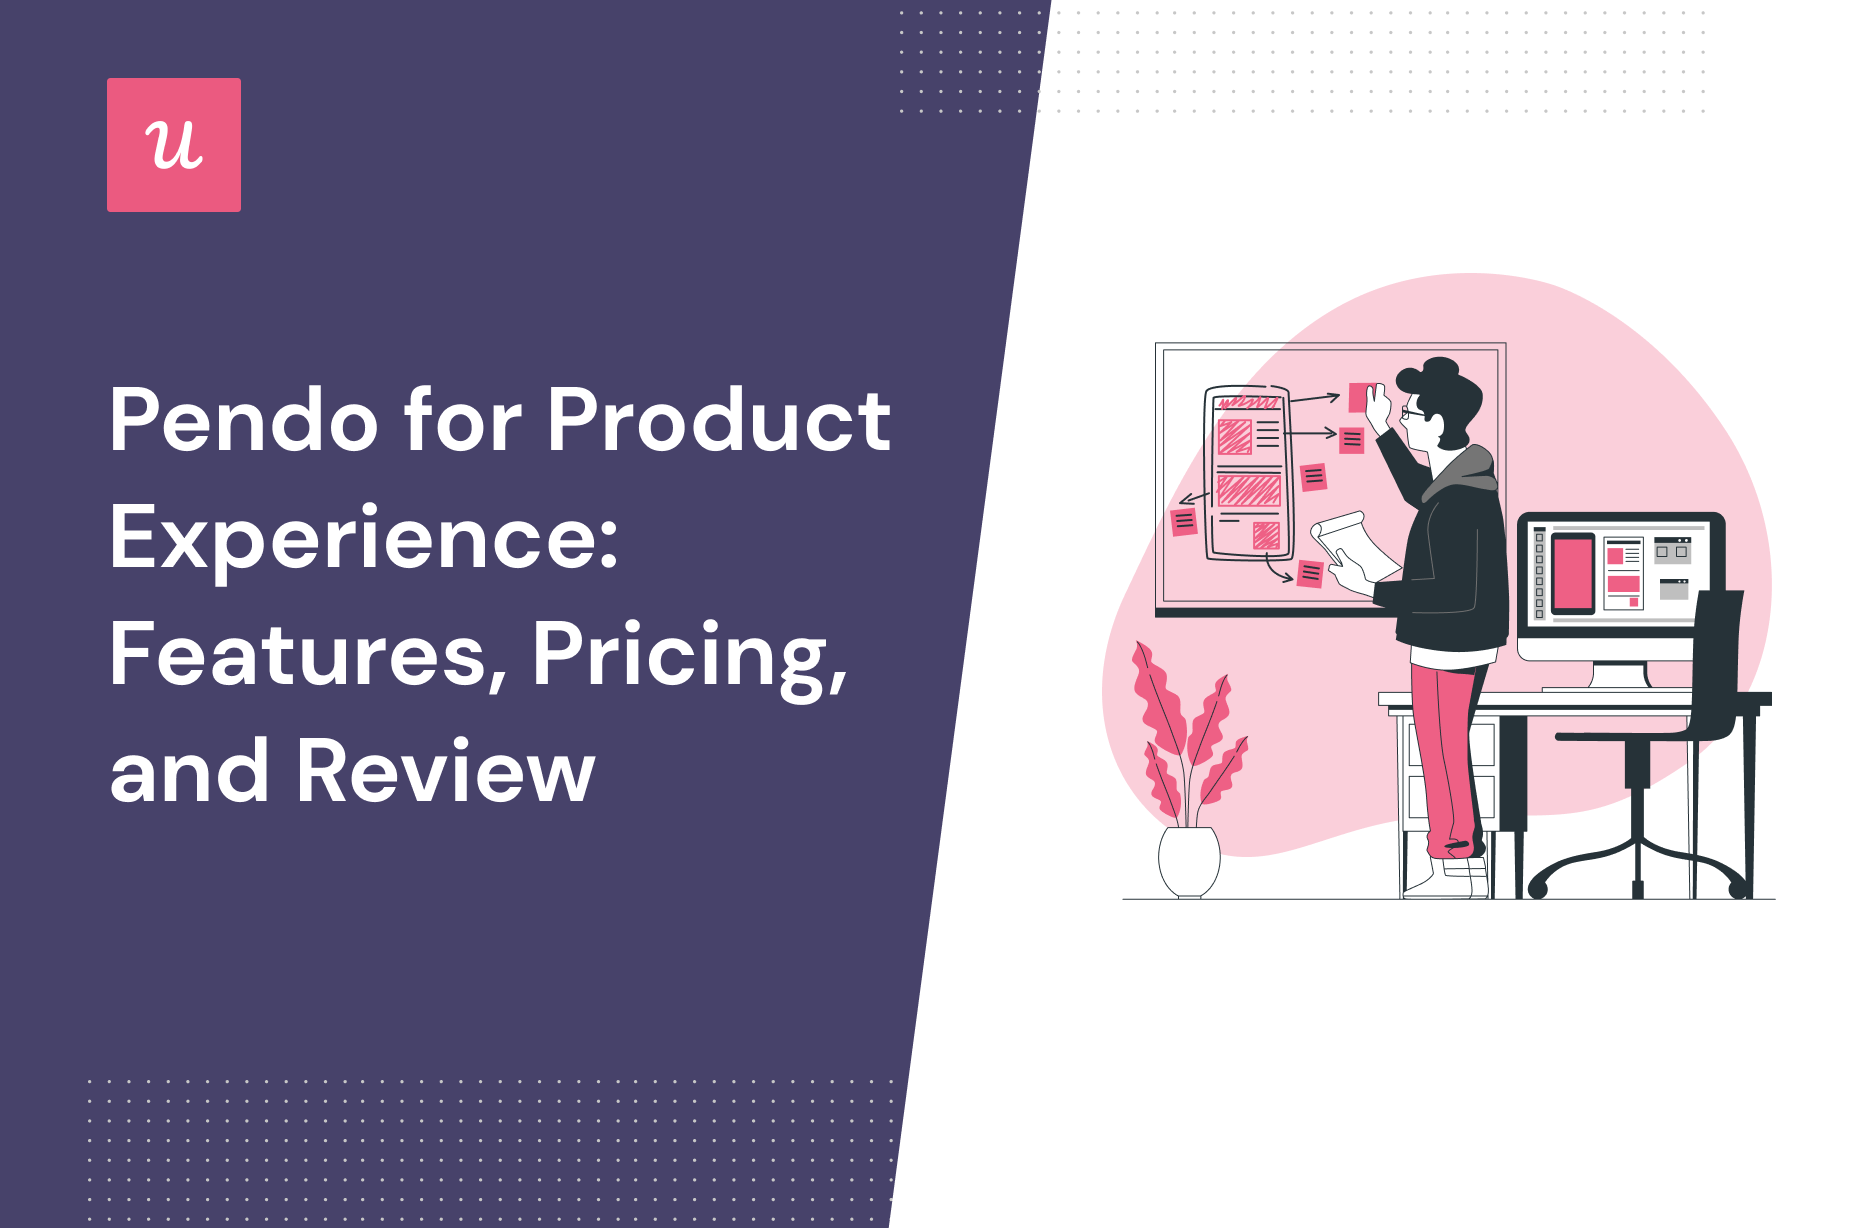 Pendo for Product Experience: Features, Pricing, and Review